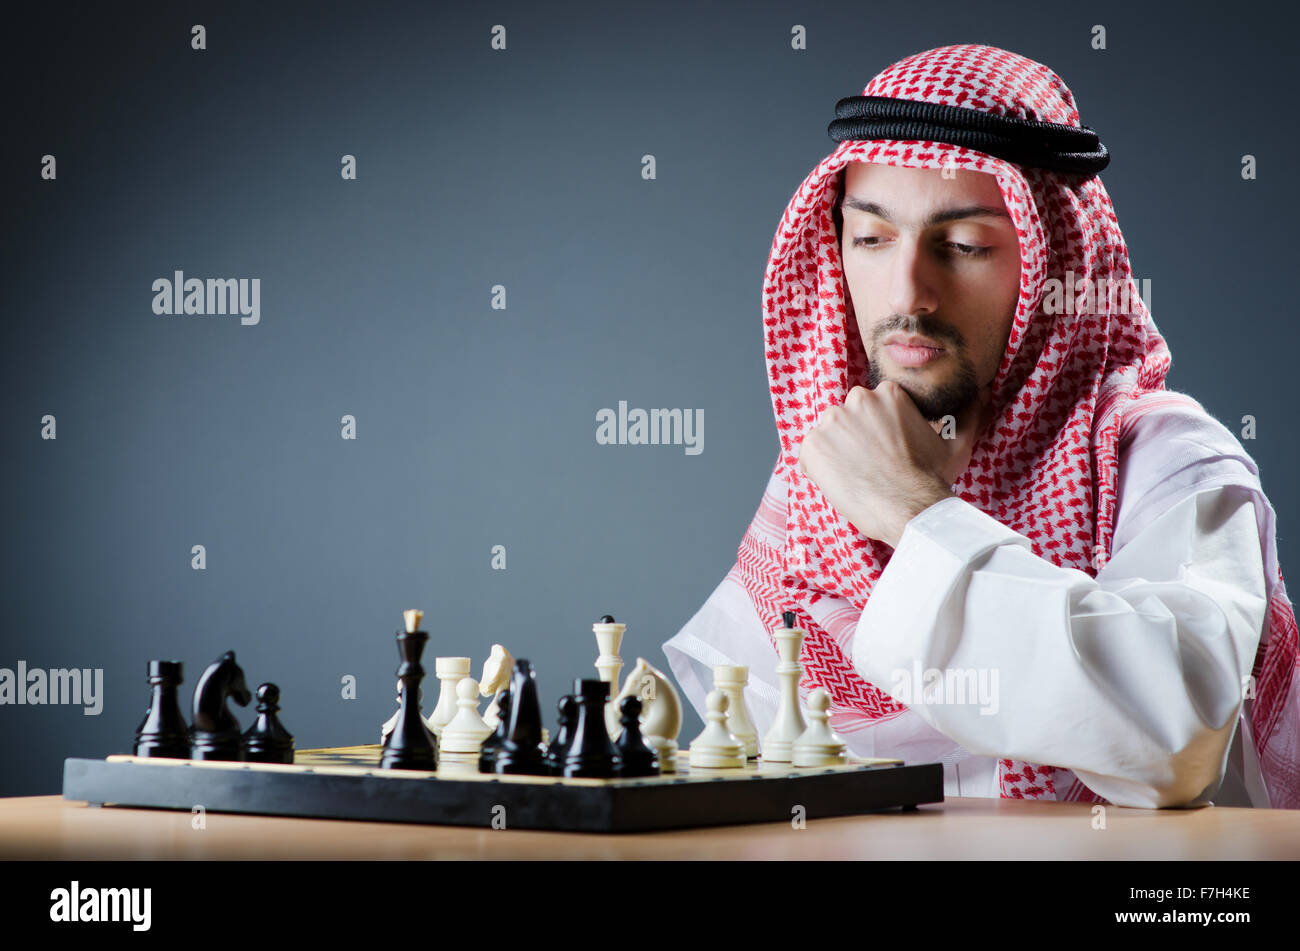 Page 4 Arab Chess Game High Resolution Stock Photography And Images Alamy